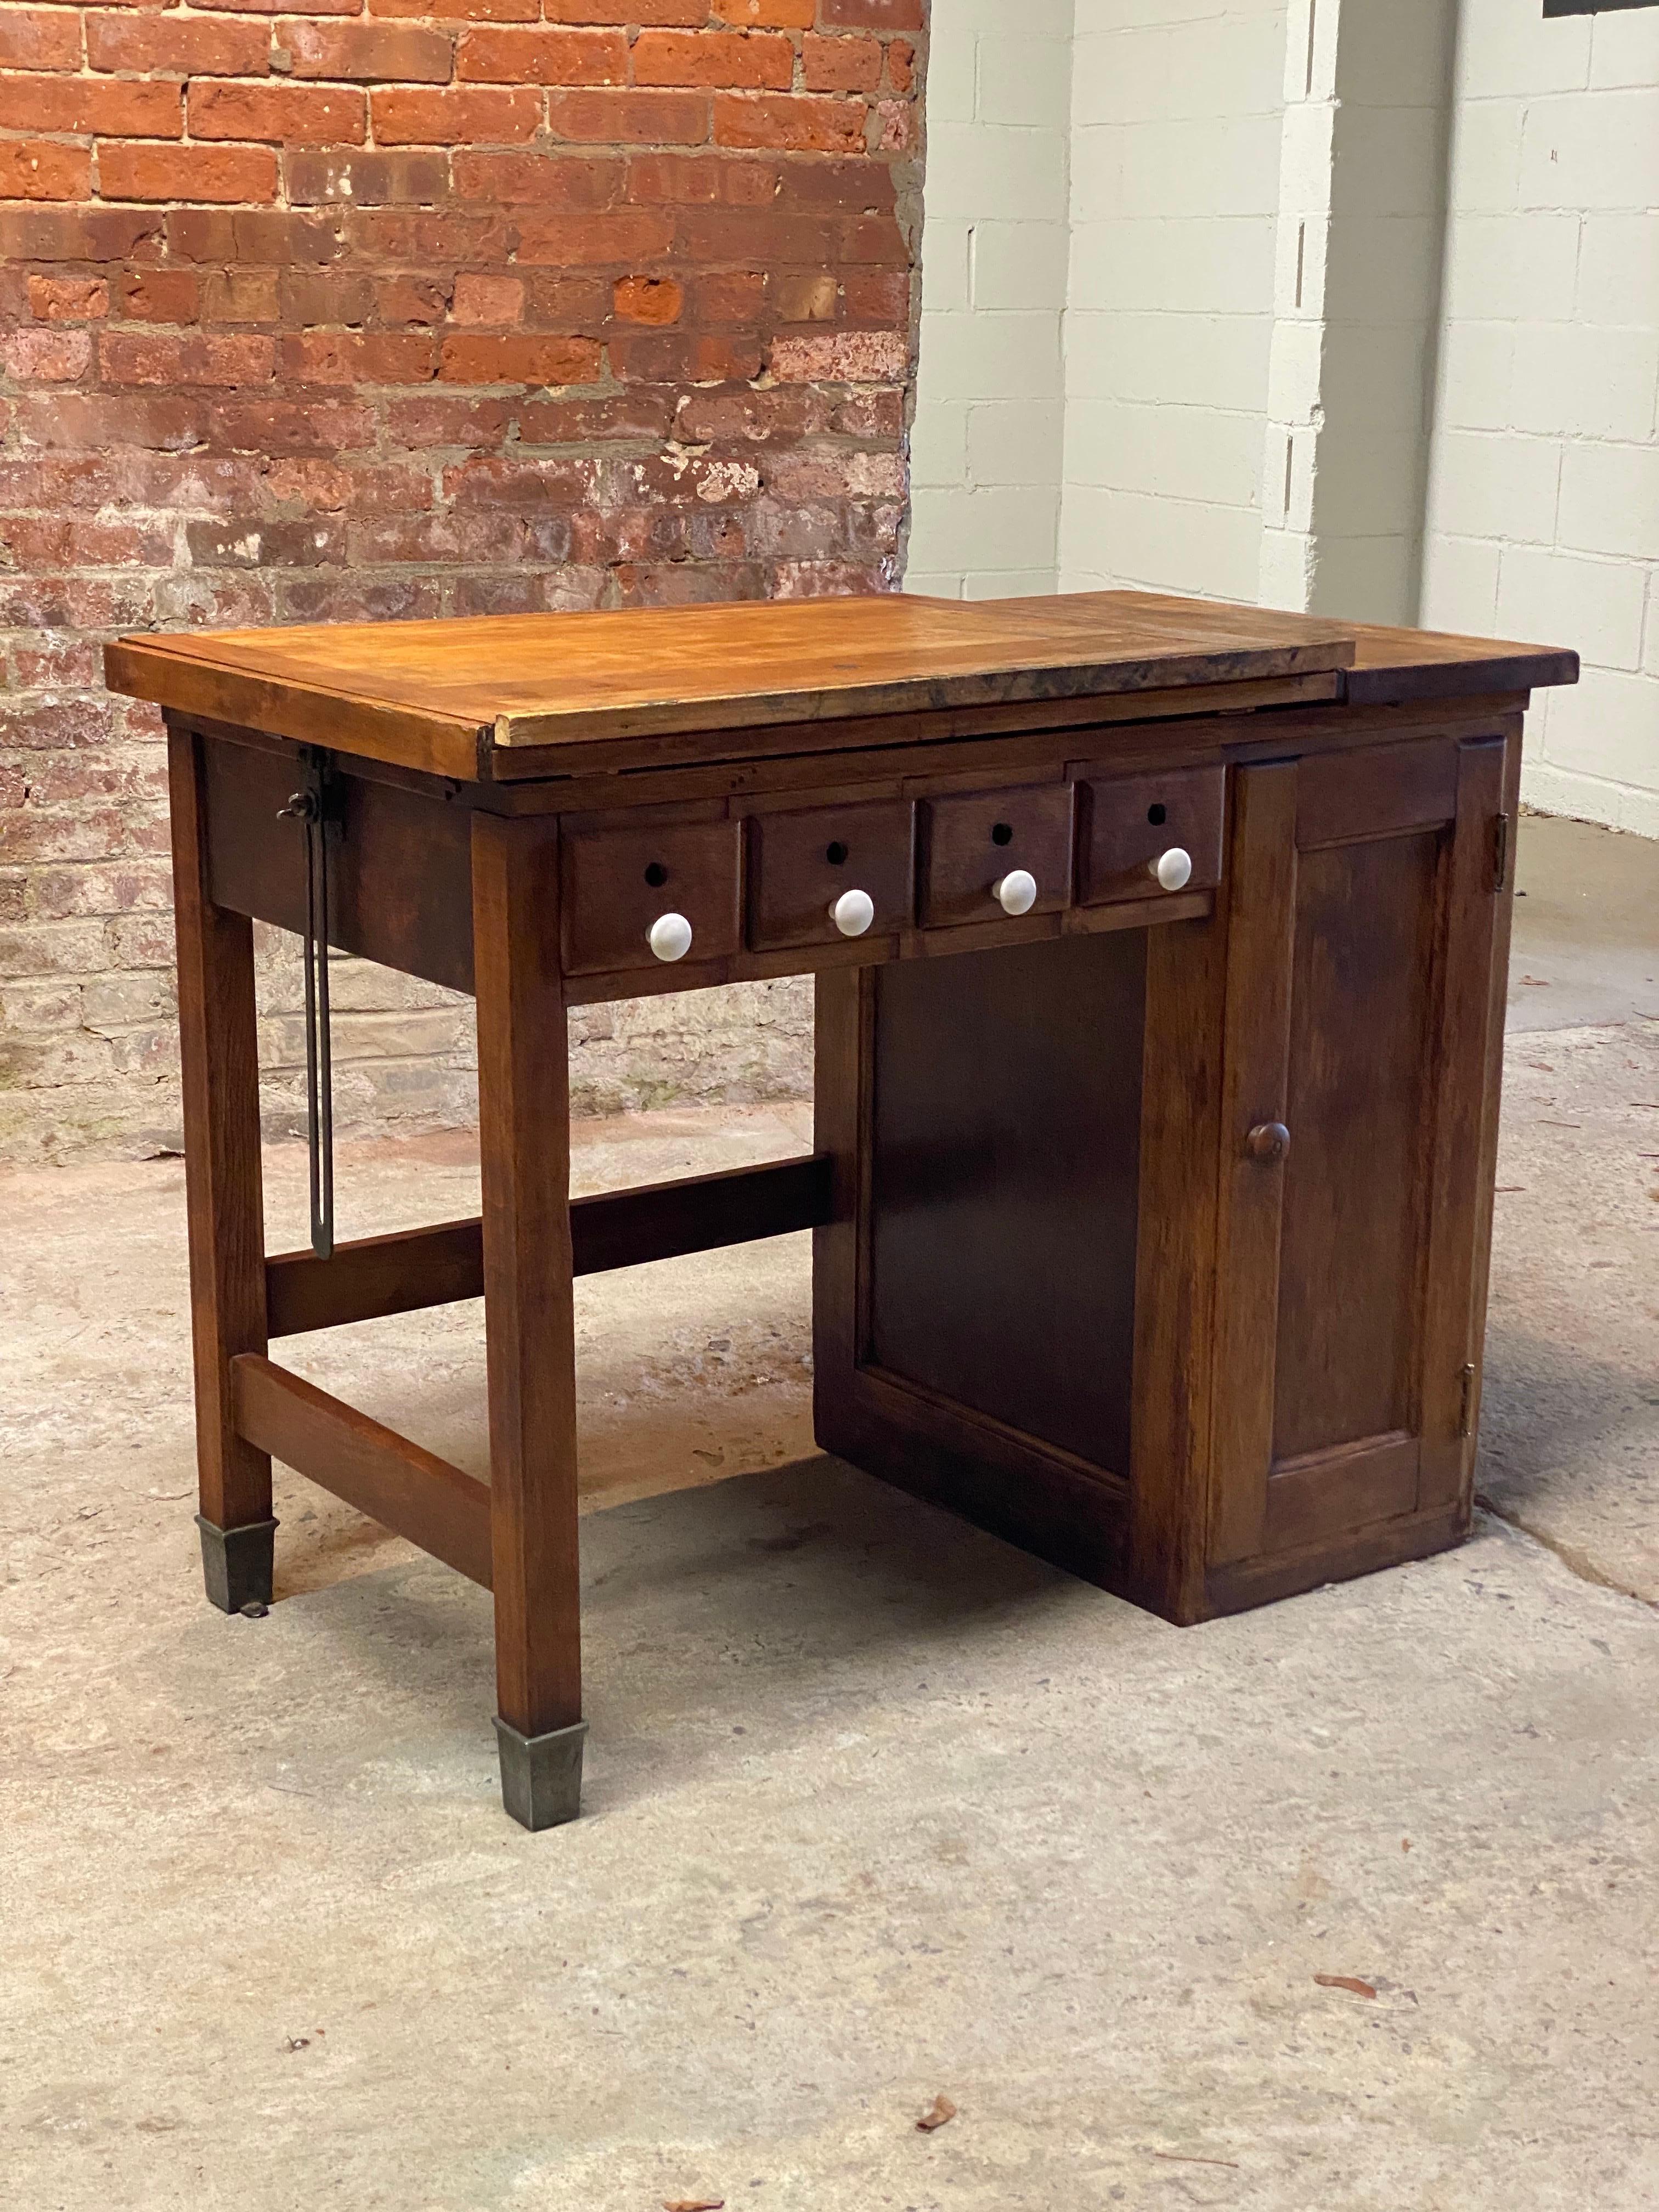 A wonderful small scale drafting table. The work table comes straight from the studio of popular Upstate New York watercolorist, Jim Adair and his estate. Jim Adair retired from a career in advertising and moved to the country in 1984 where he